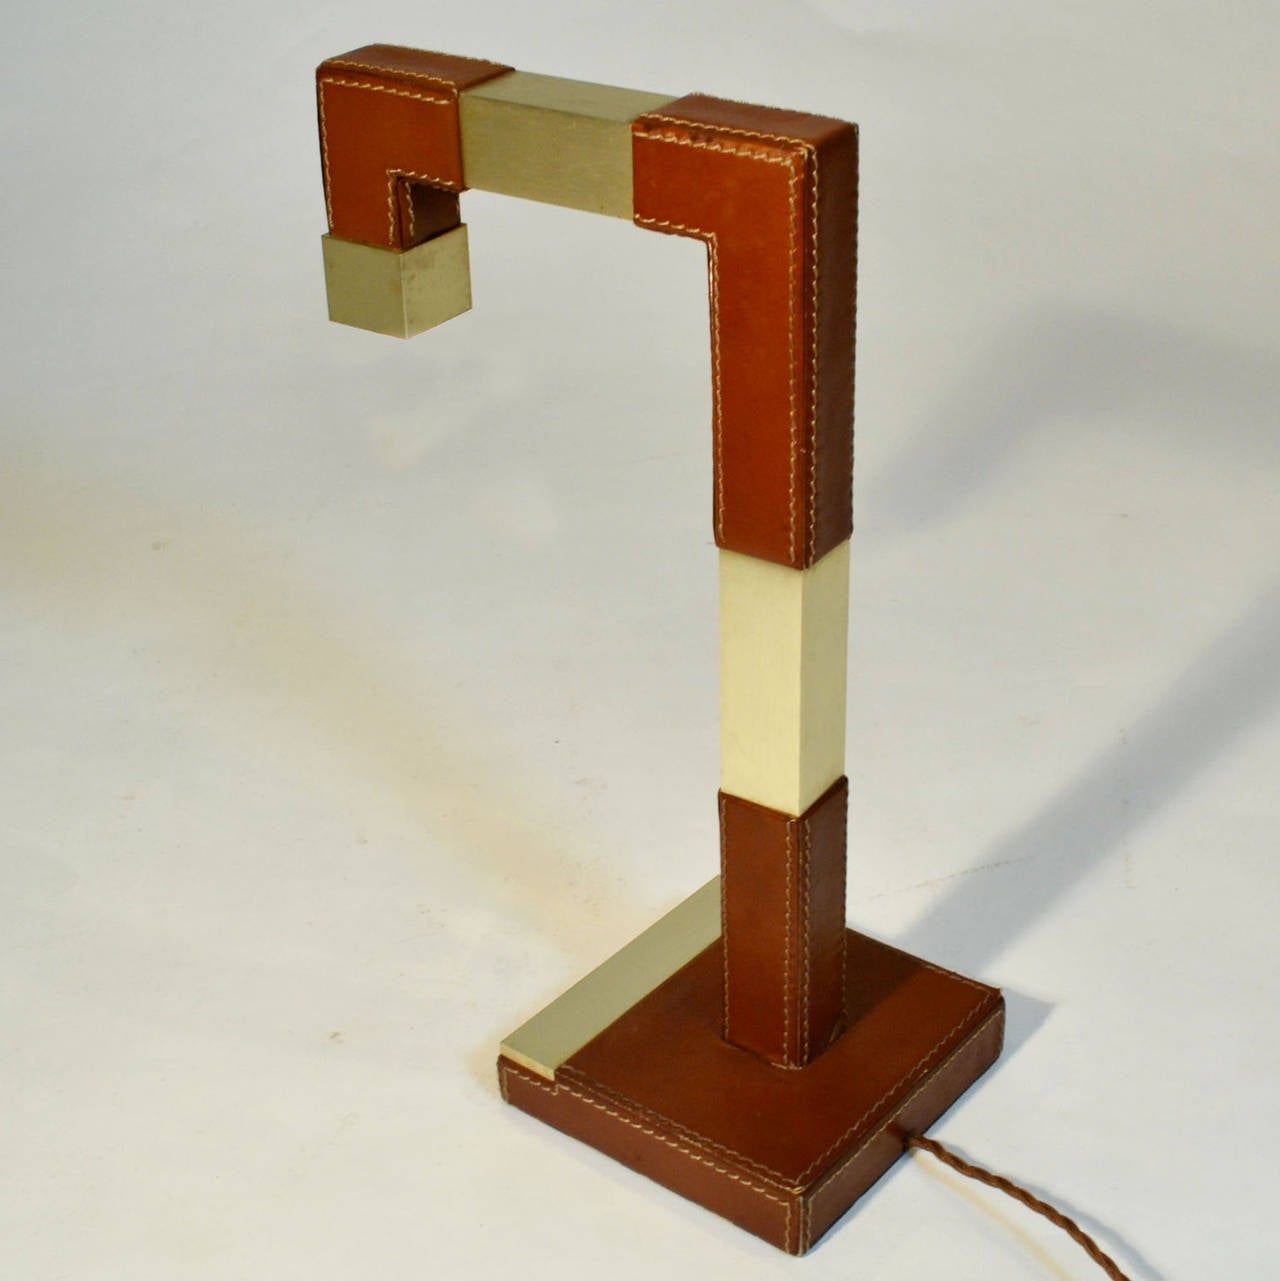 Rectangular table lamp in stitched mid brown hide leather and brushed brass.